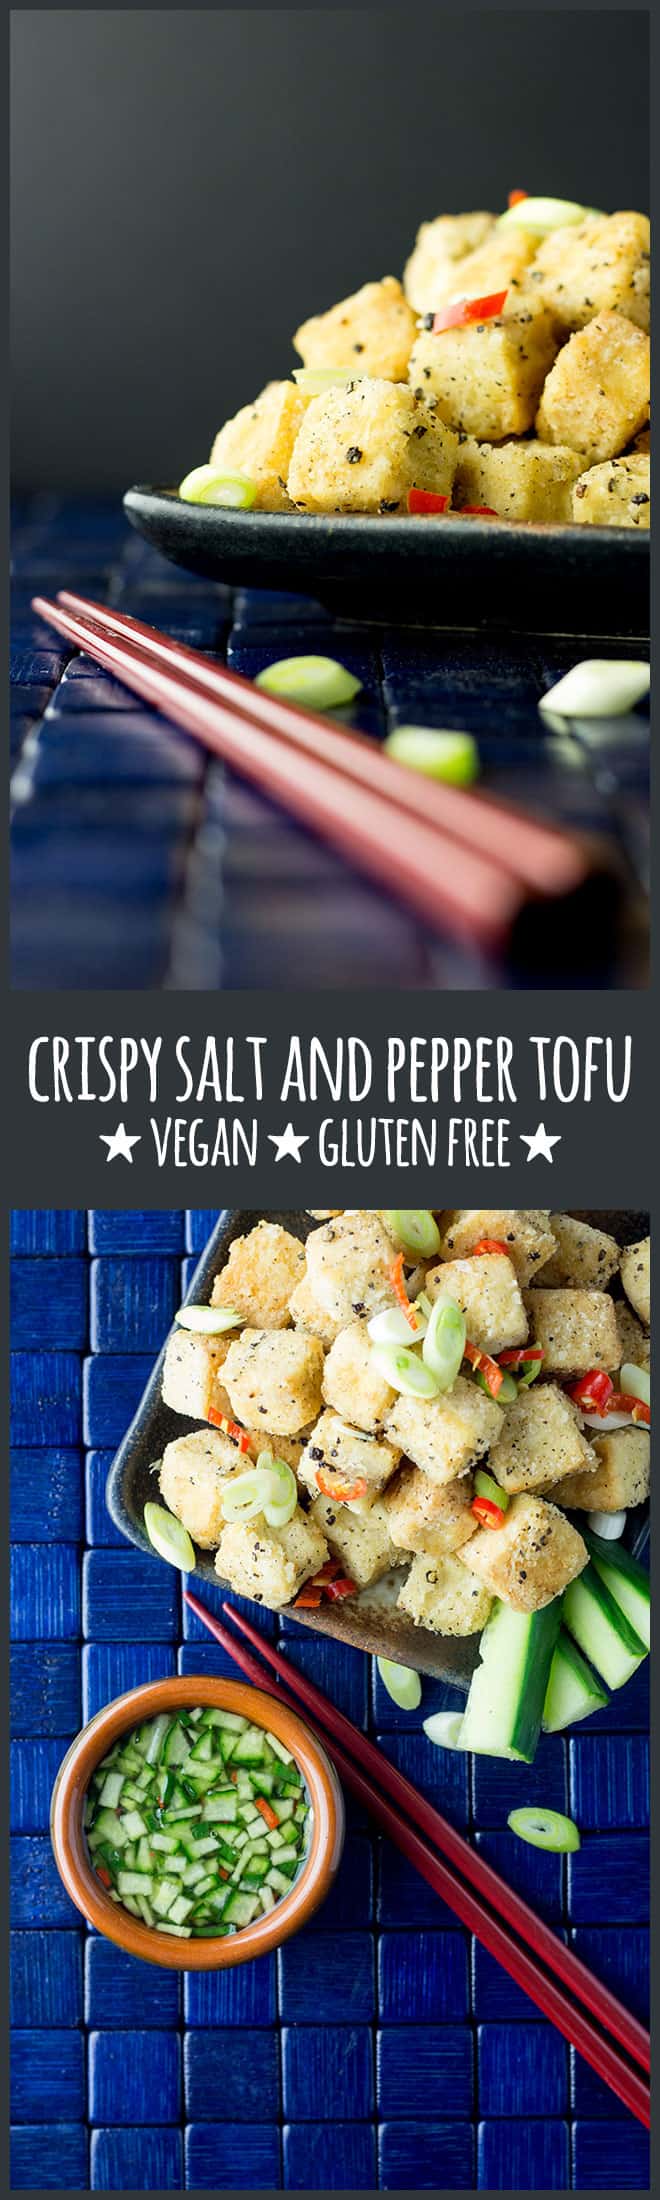 Crispy salt and pepper tofu with a cucumber and chilli dipping sauce is a moreish little nibble to have with drinks, or serve it up with sticky rice and steamed greens for a simple but yummy dinner.